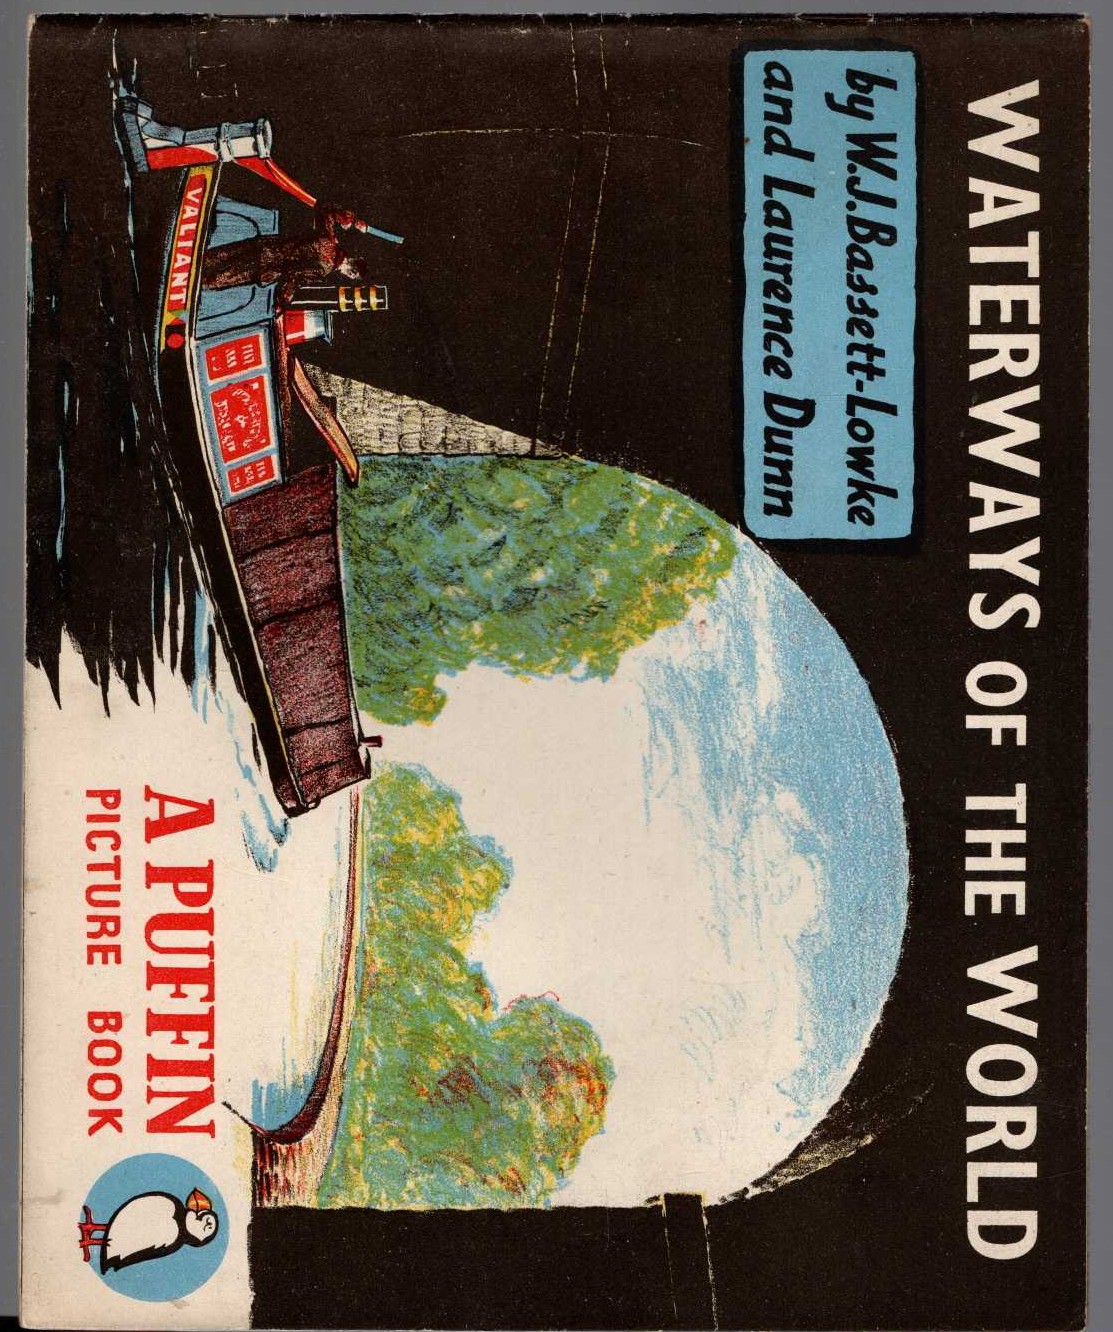 WATERWAYS OF THE WORLD front book cover image